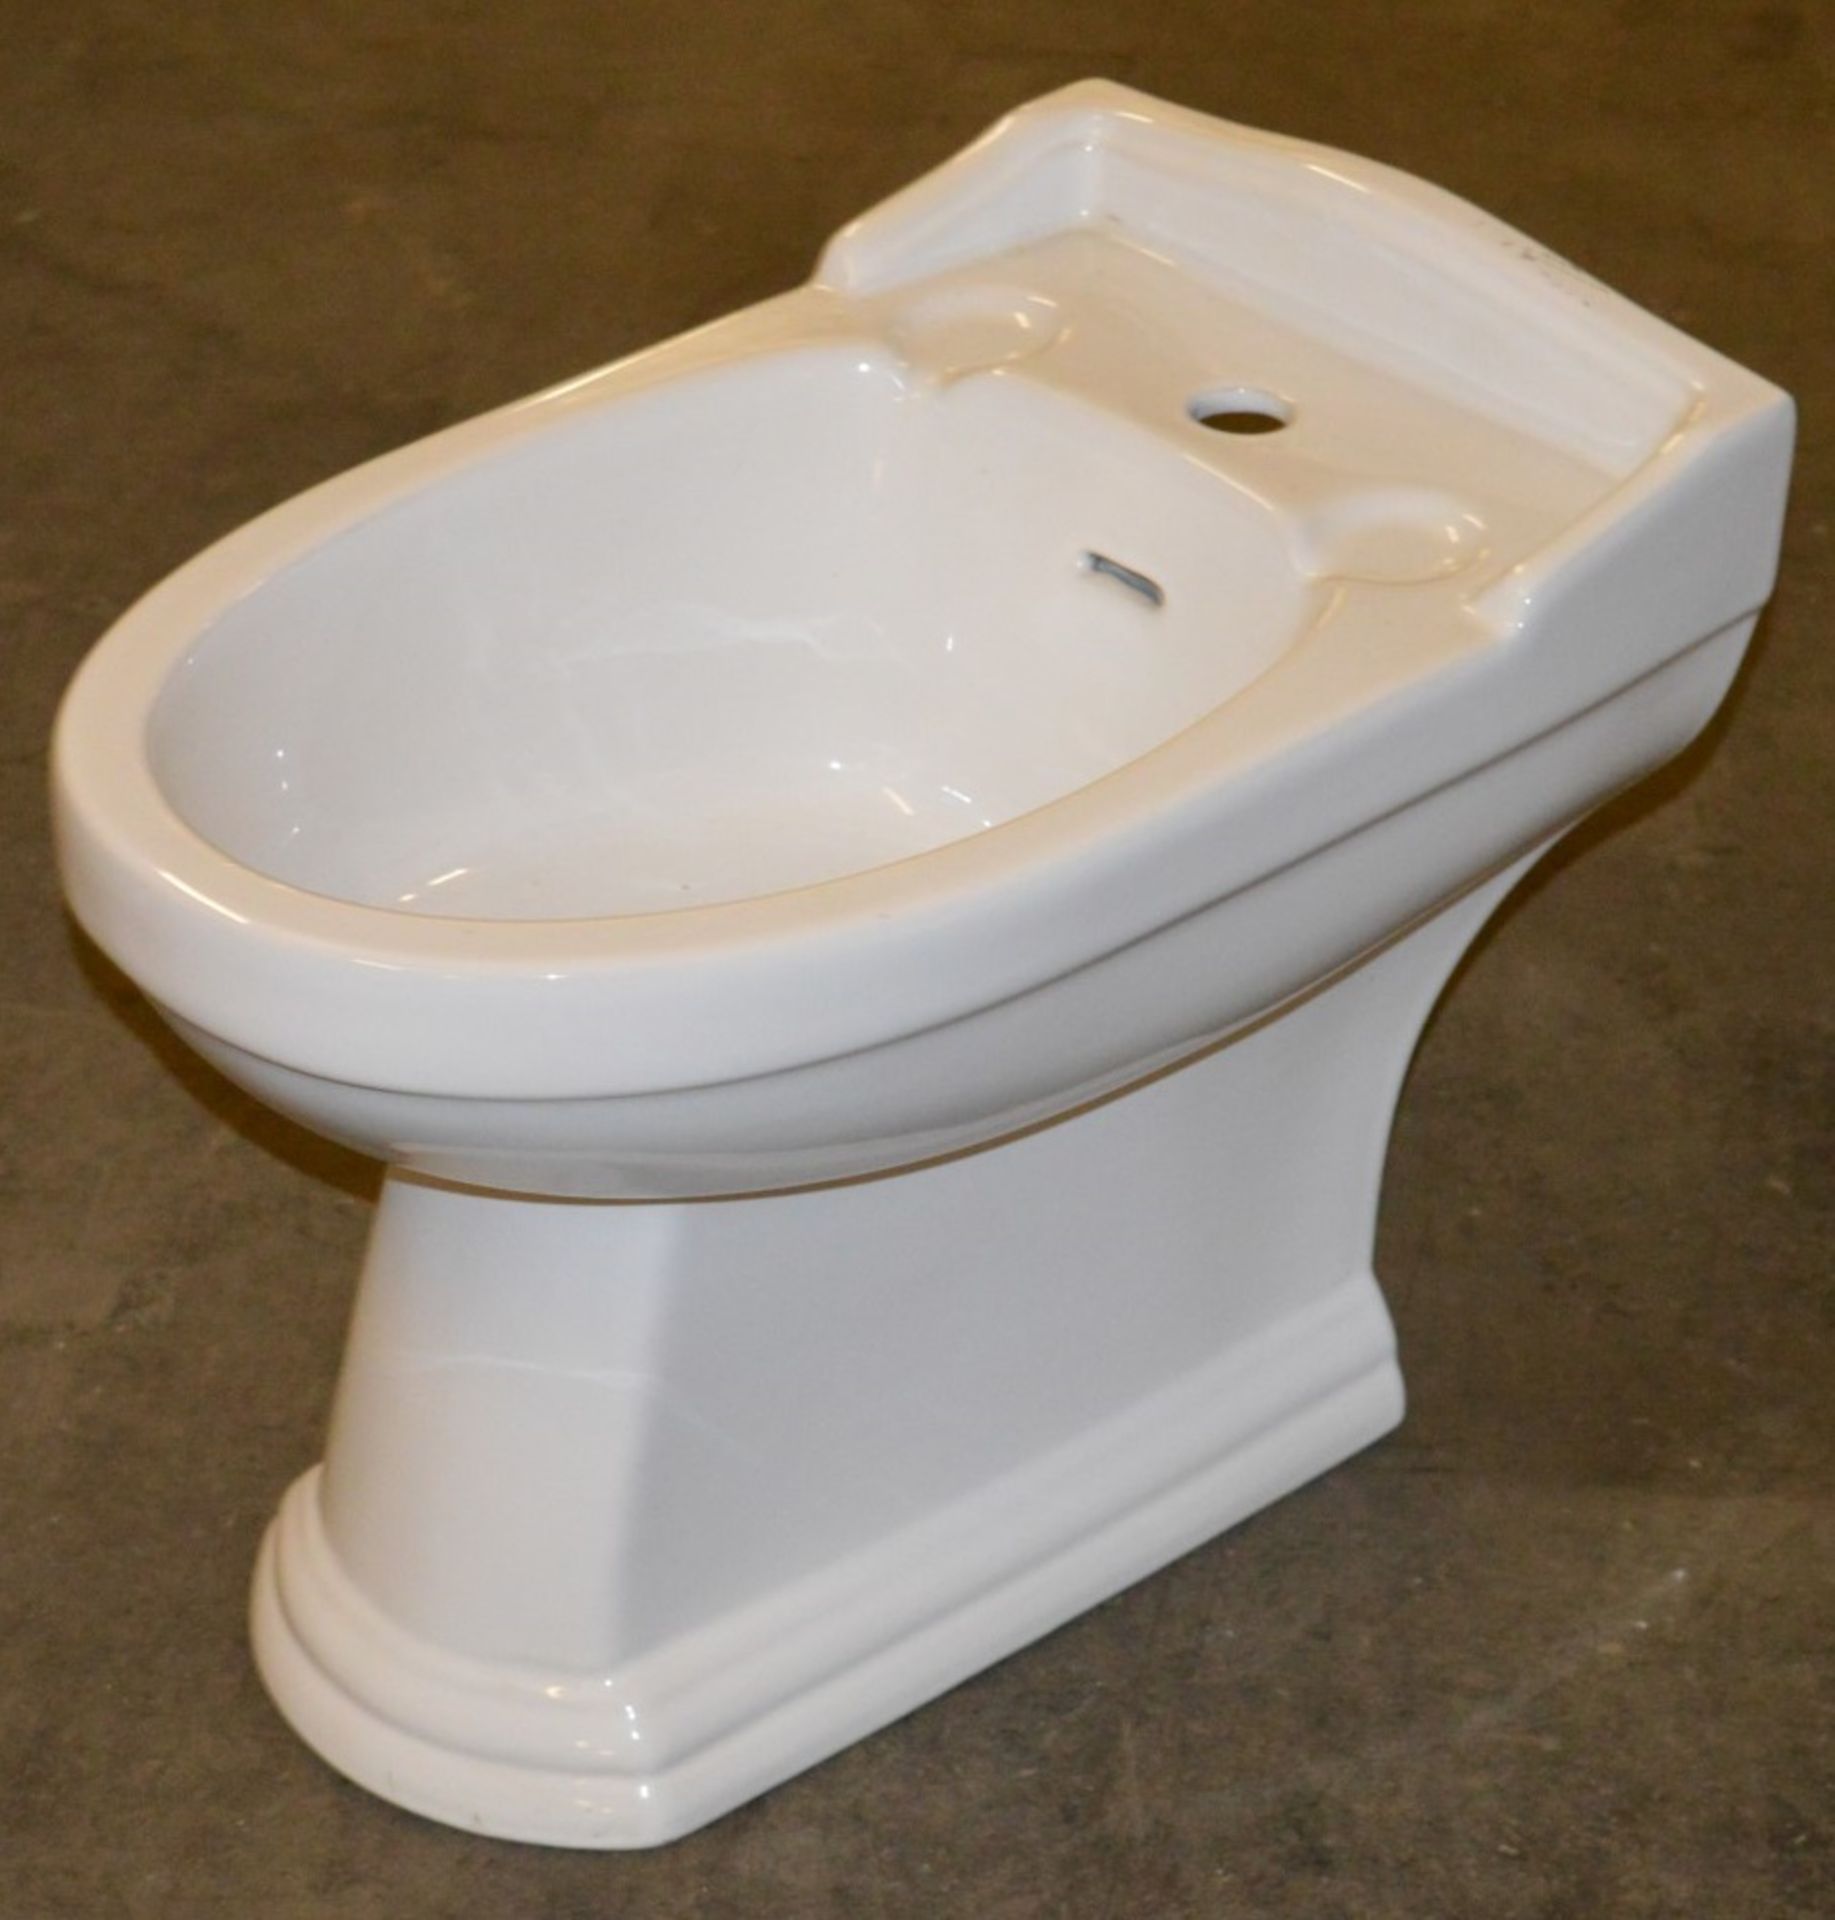 1 x Vogue Bathrooms DAVENPORT Single Tap Hole BIDET - Brand New and Boxed - High Quality White